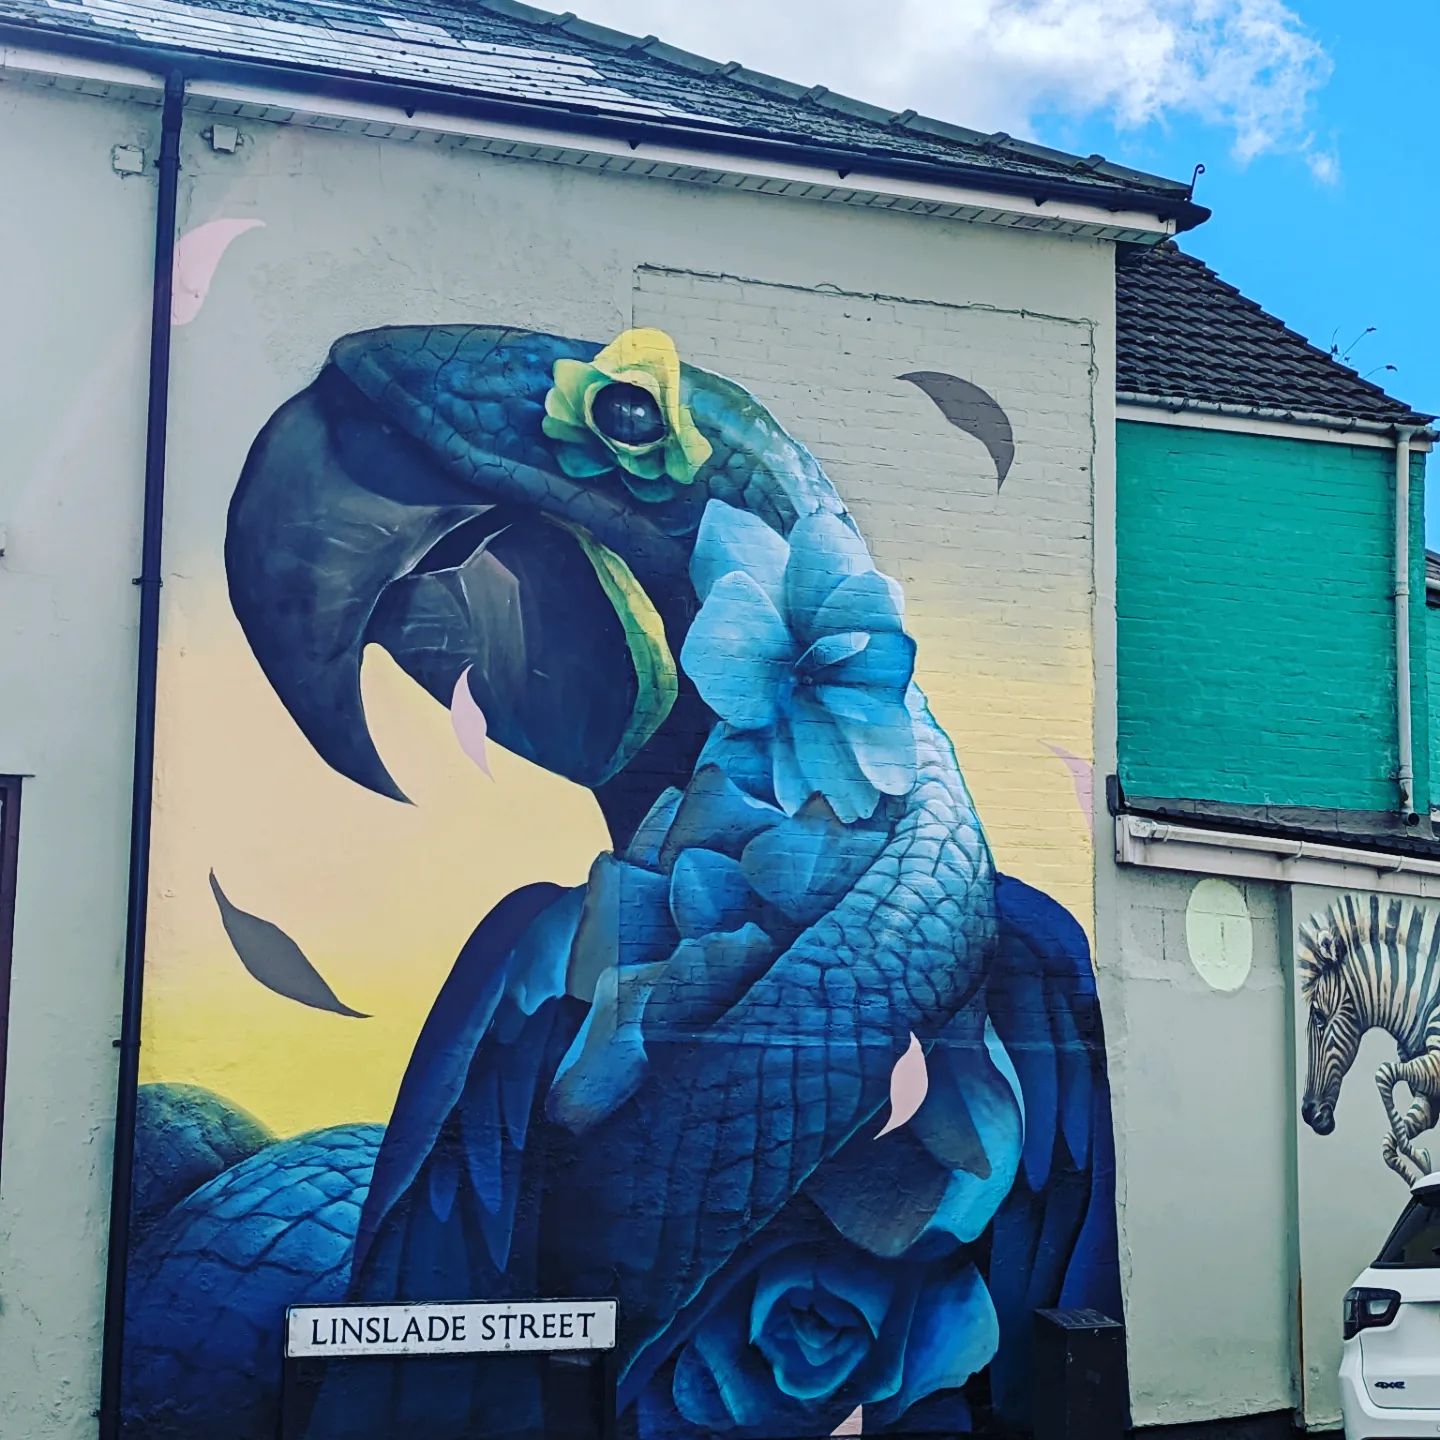 Checking out some of the big local artwork in Rodbourne today!#art #gwr #parrot #swindon@we_are_swindon @7th_pencil @jaksta_art @i_bee_w  @kapitall.gee